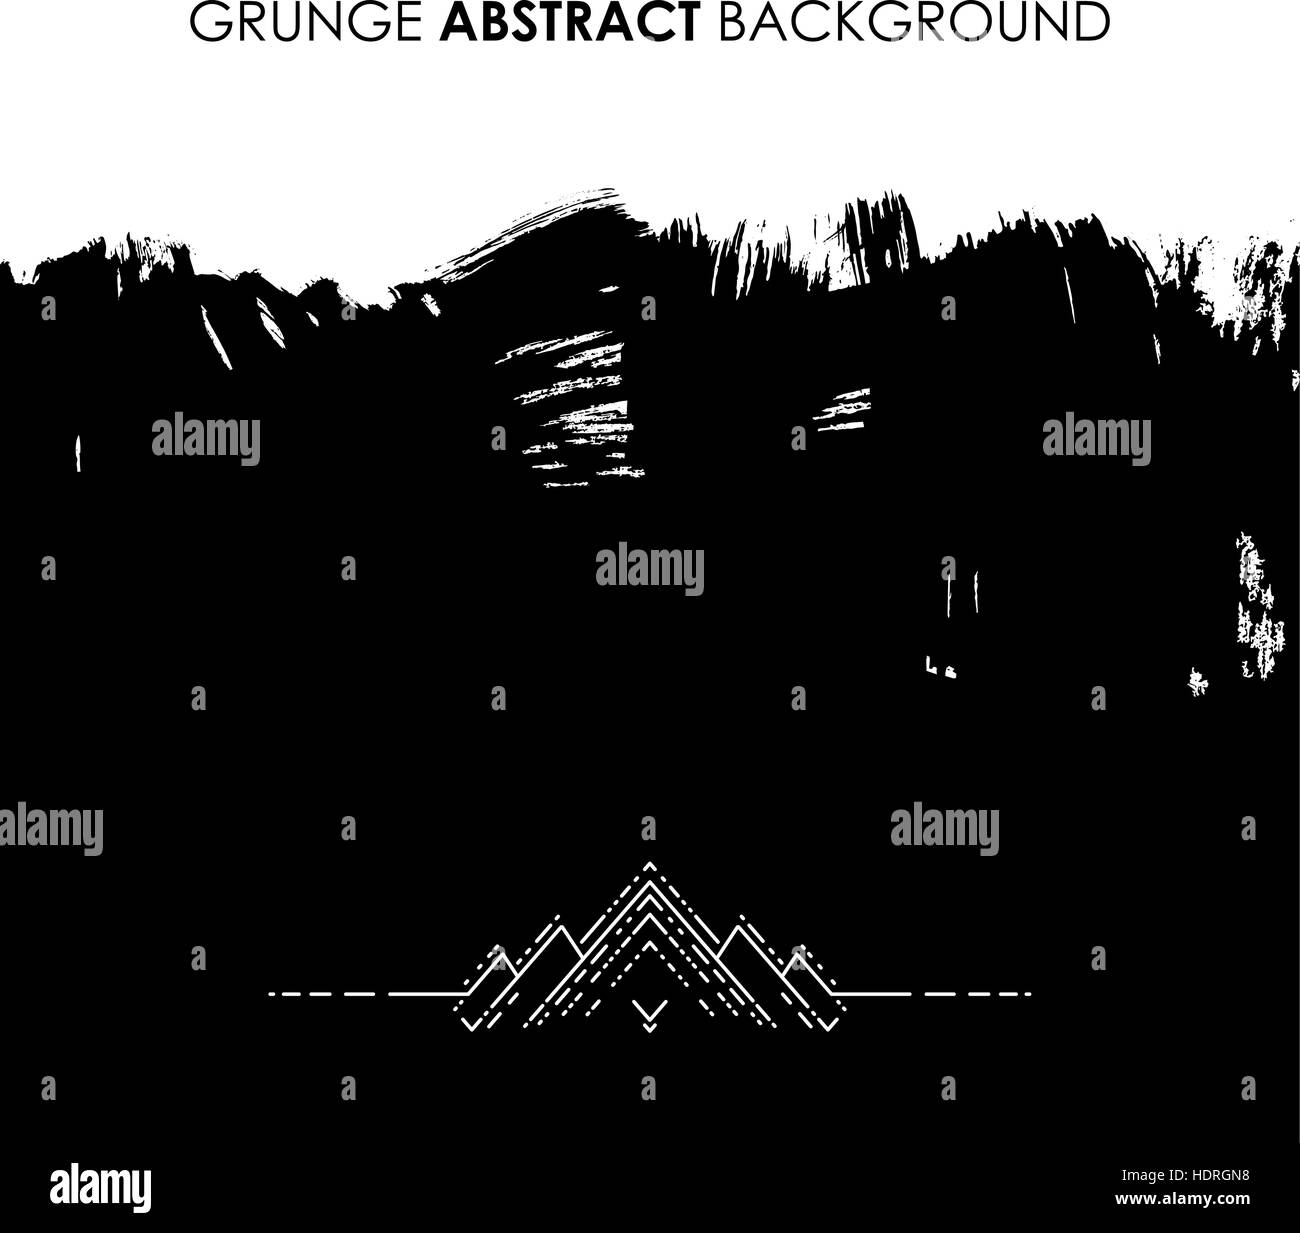 Abstract modern grunge background Stock Vector